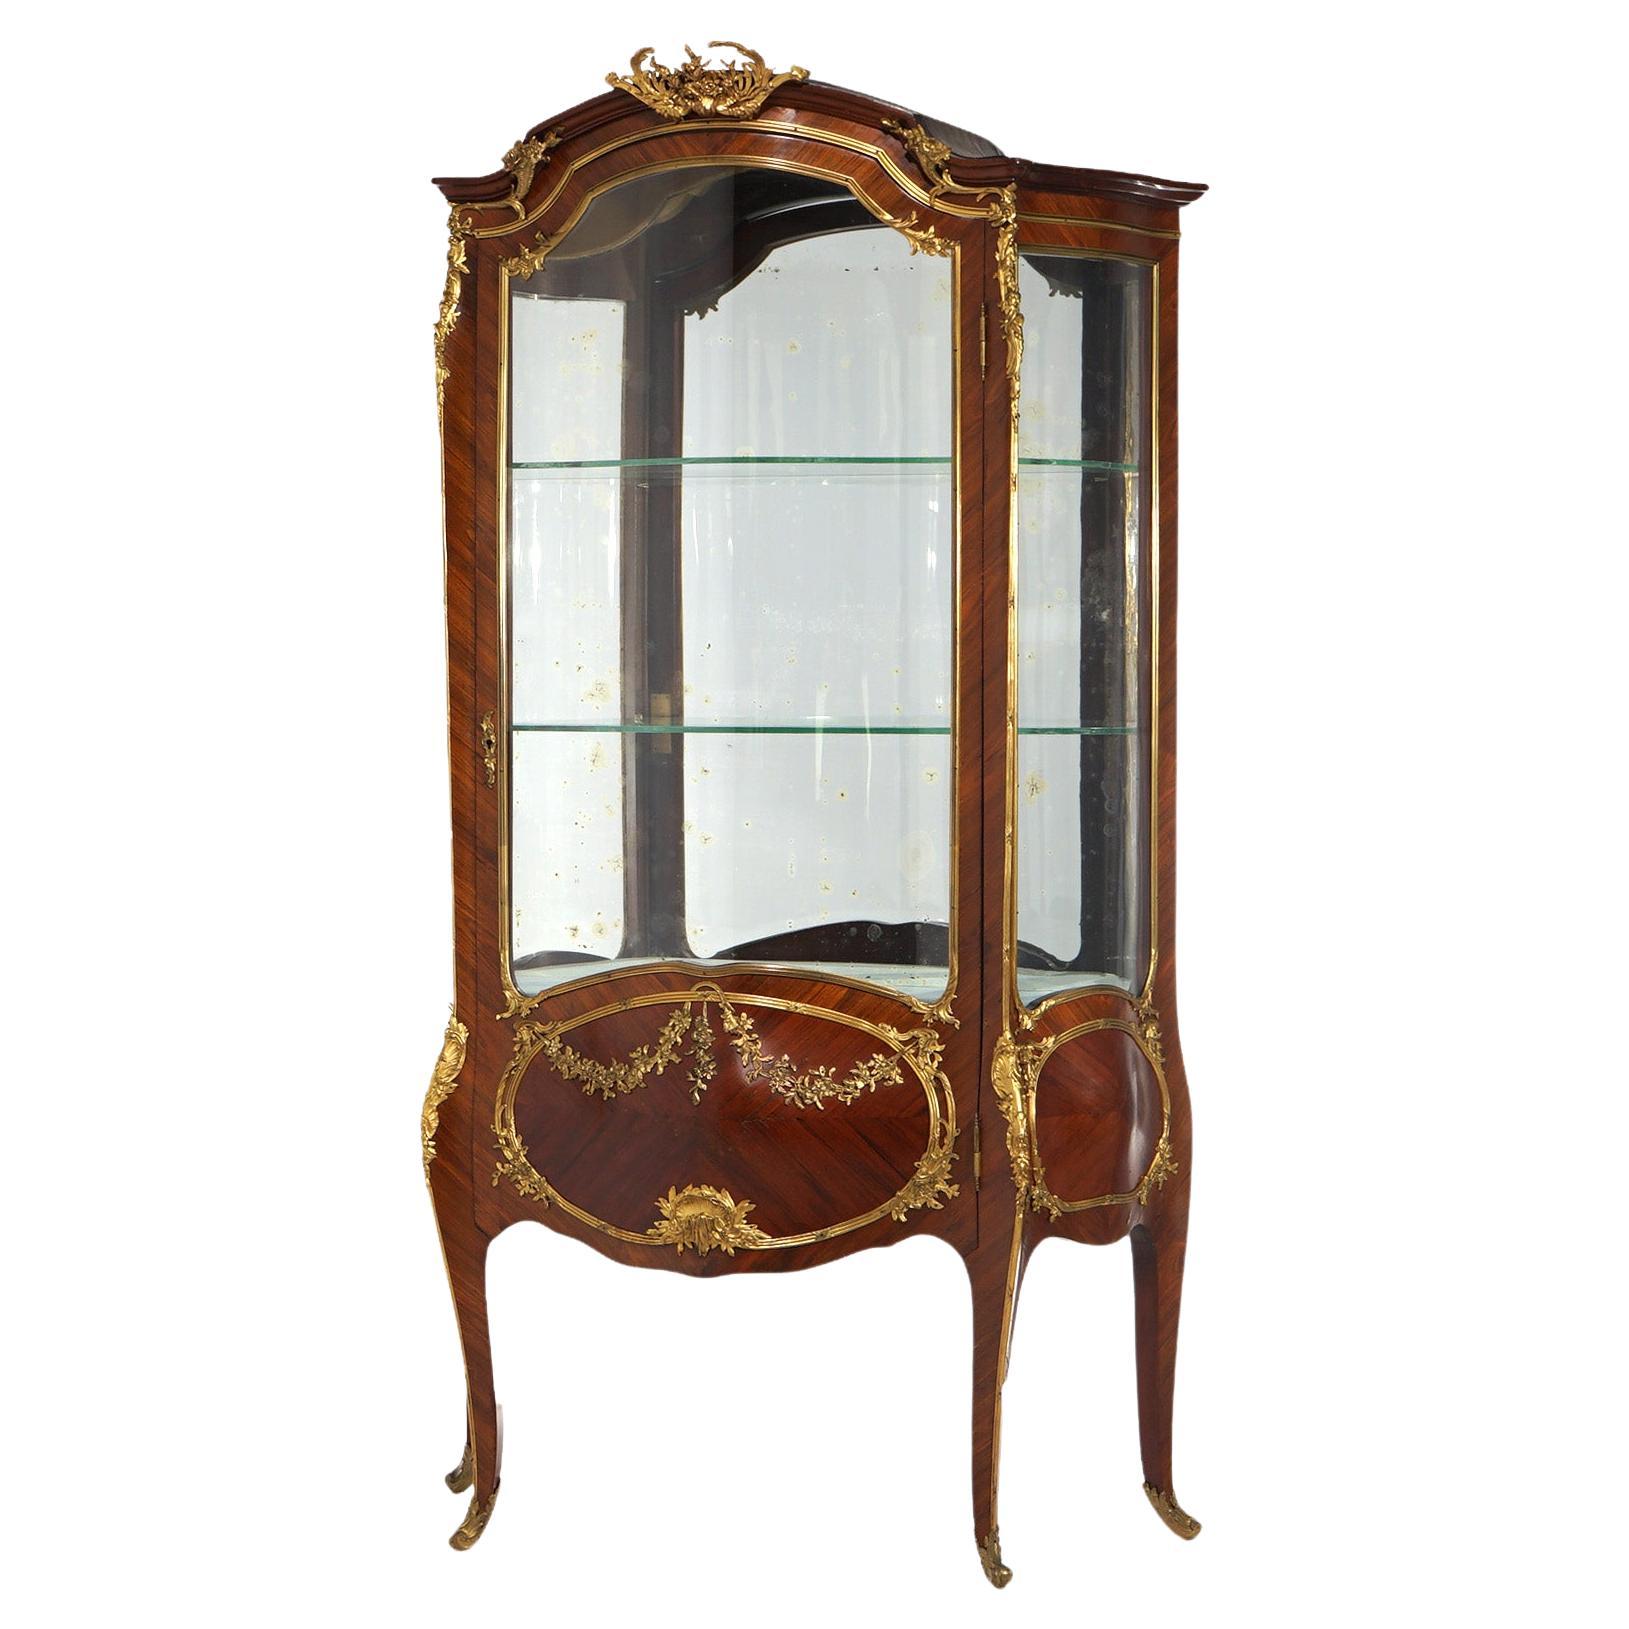 ***Ask About Reduced In-House Delivery Rates - Reliable Professional Service & Fully Insured***
Oversized Francois Linke (1855-1946) Signed Parisian Louis XIV vitrine offers kingwood and mahogany construction with cast foliate ormolu throughout,